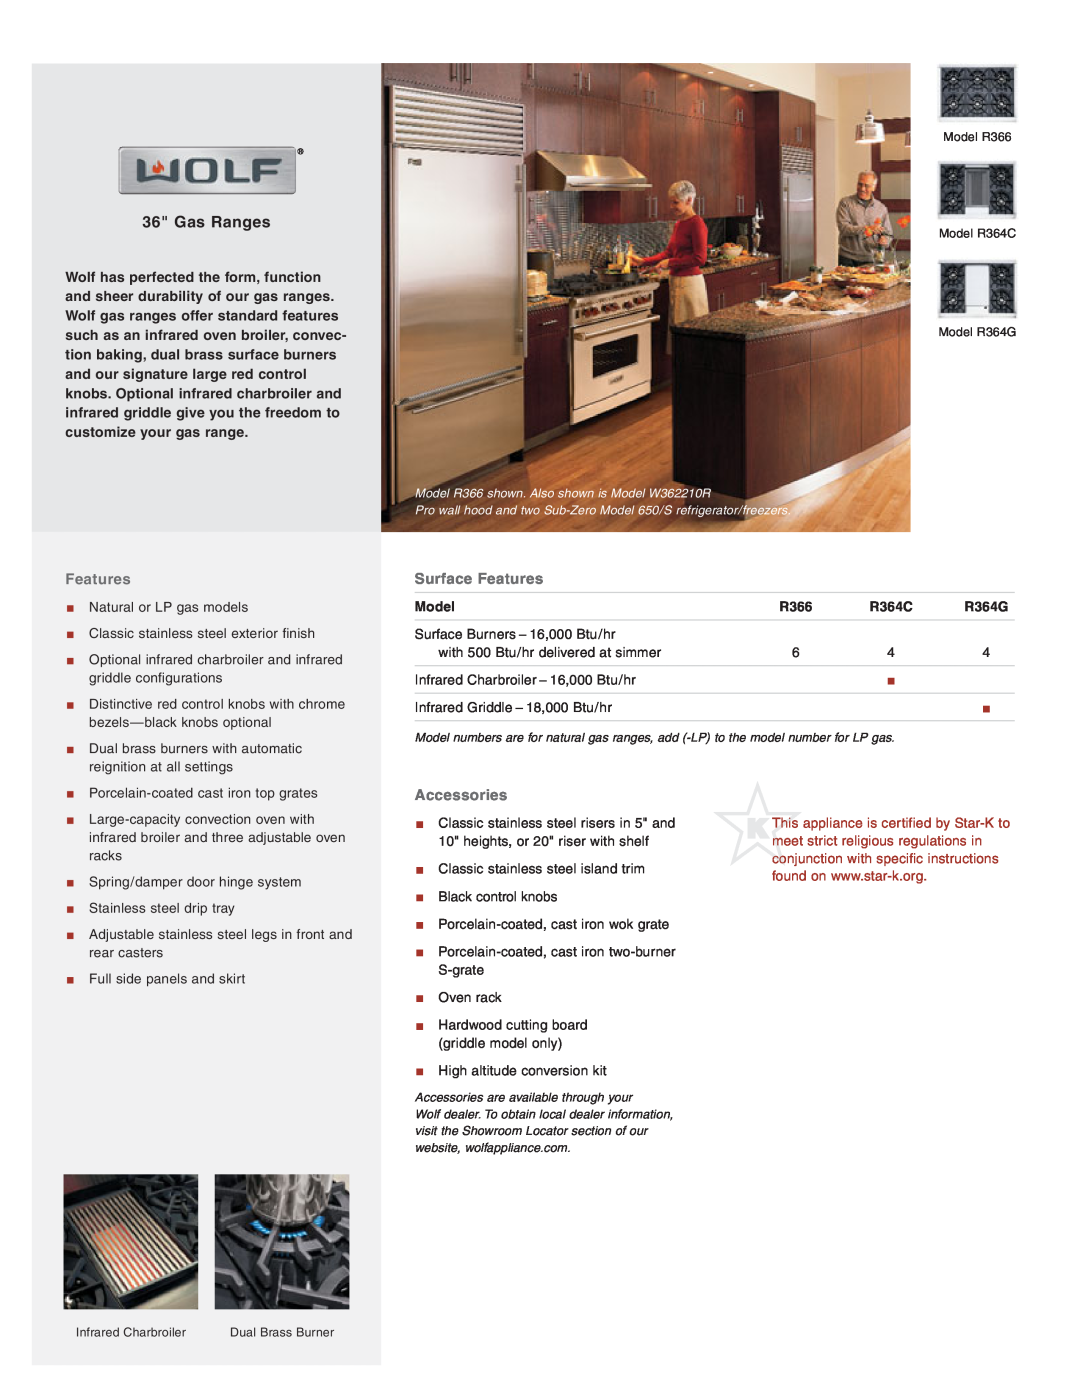 Wolf Appliance Company R364G manual Gas Ranges, Surface Features, Accessories, Model, R366, R364C 